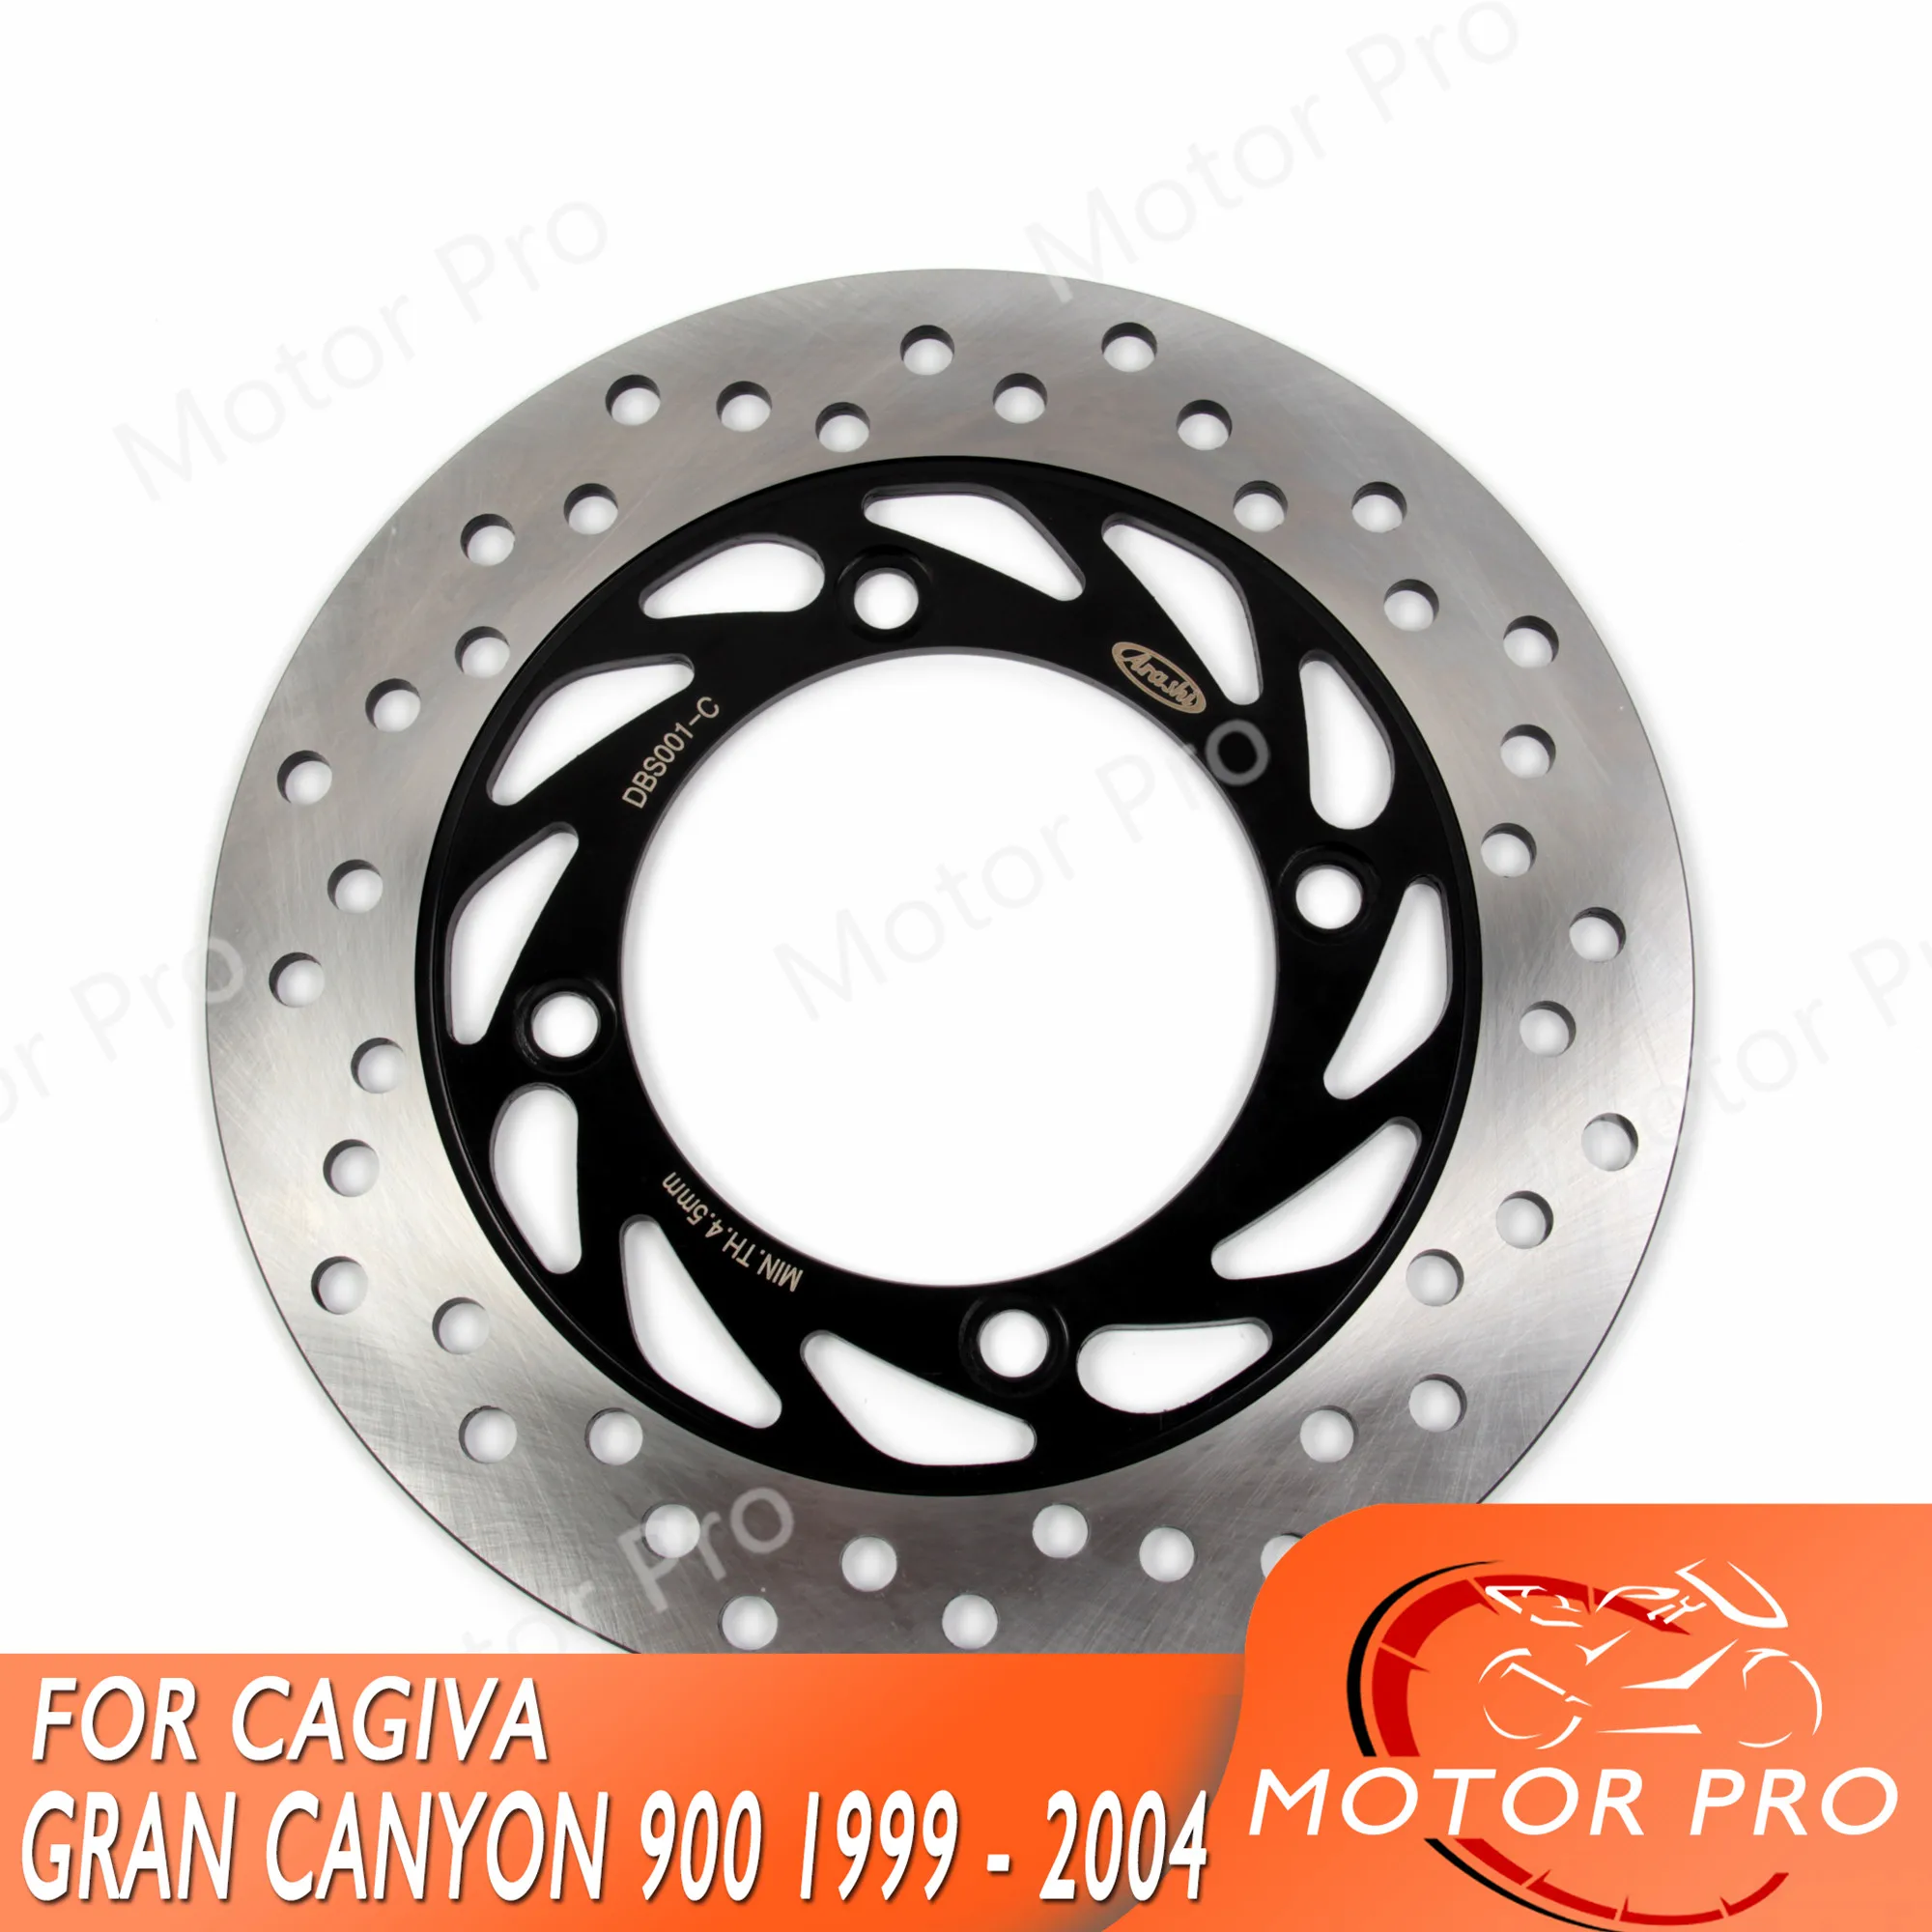 

For Cagiva Gran Canyon 900 1999 - 2004 Rear Brake Disc Rotor Disk Motorcycle Accessories CNC Aluminum 99 2000 2001 2002 2003 04